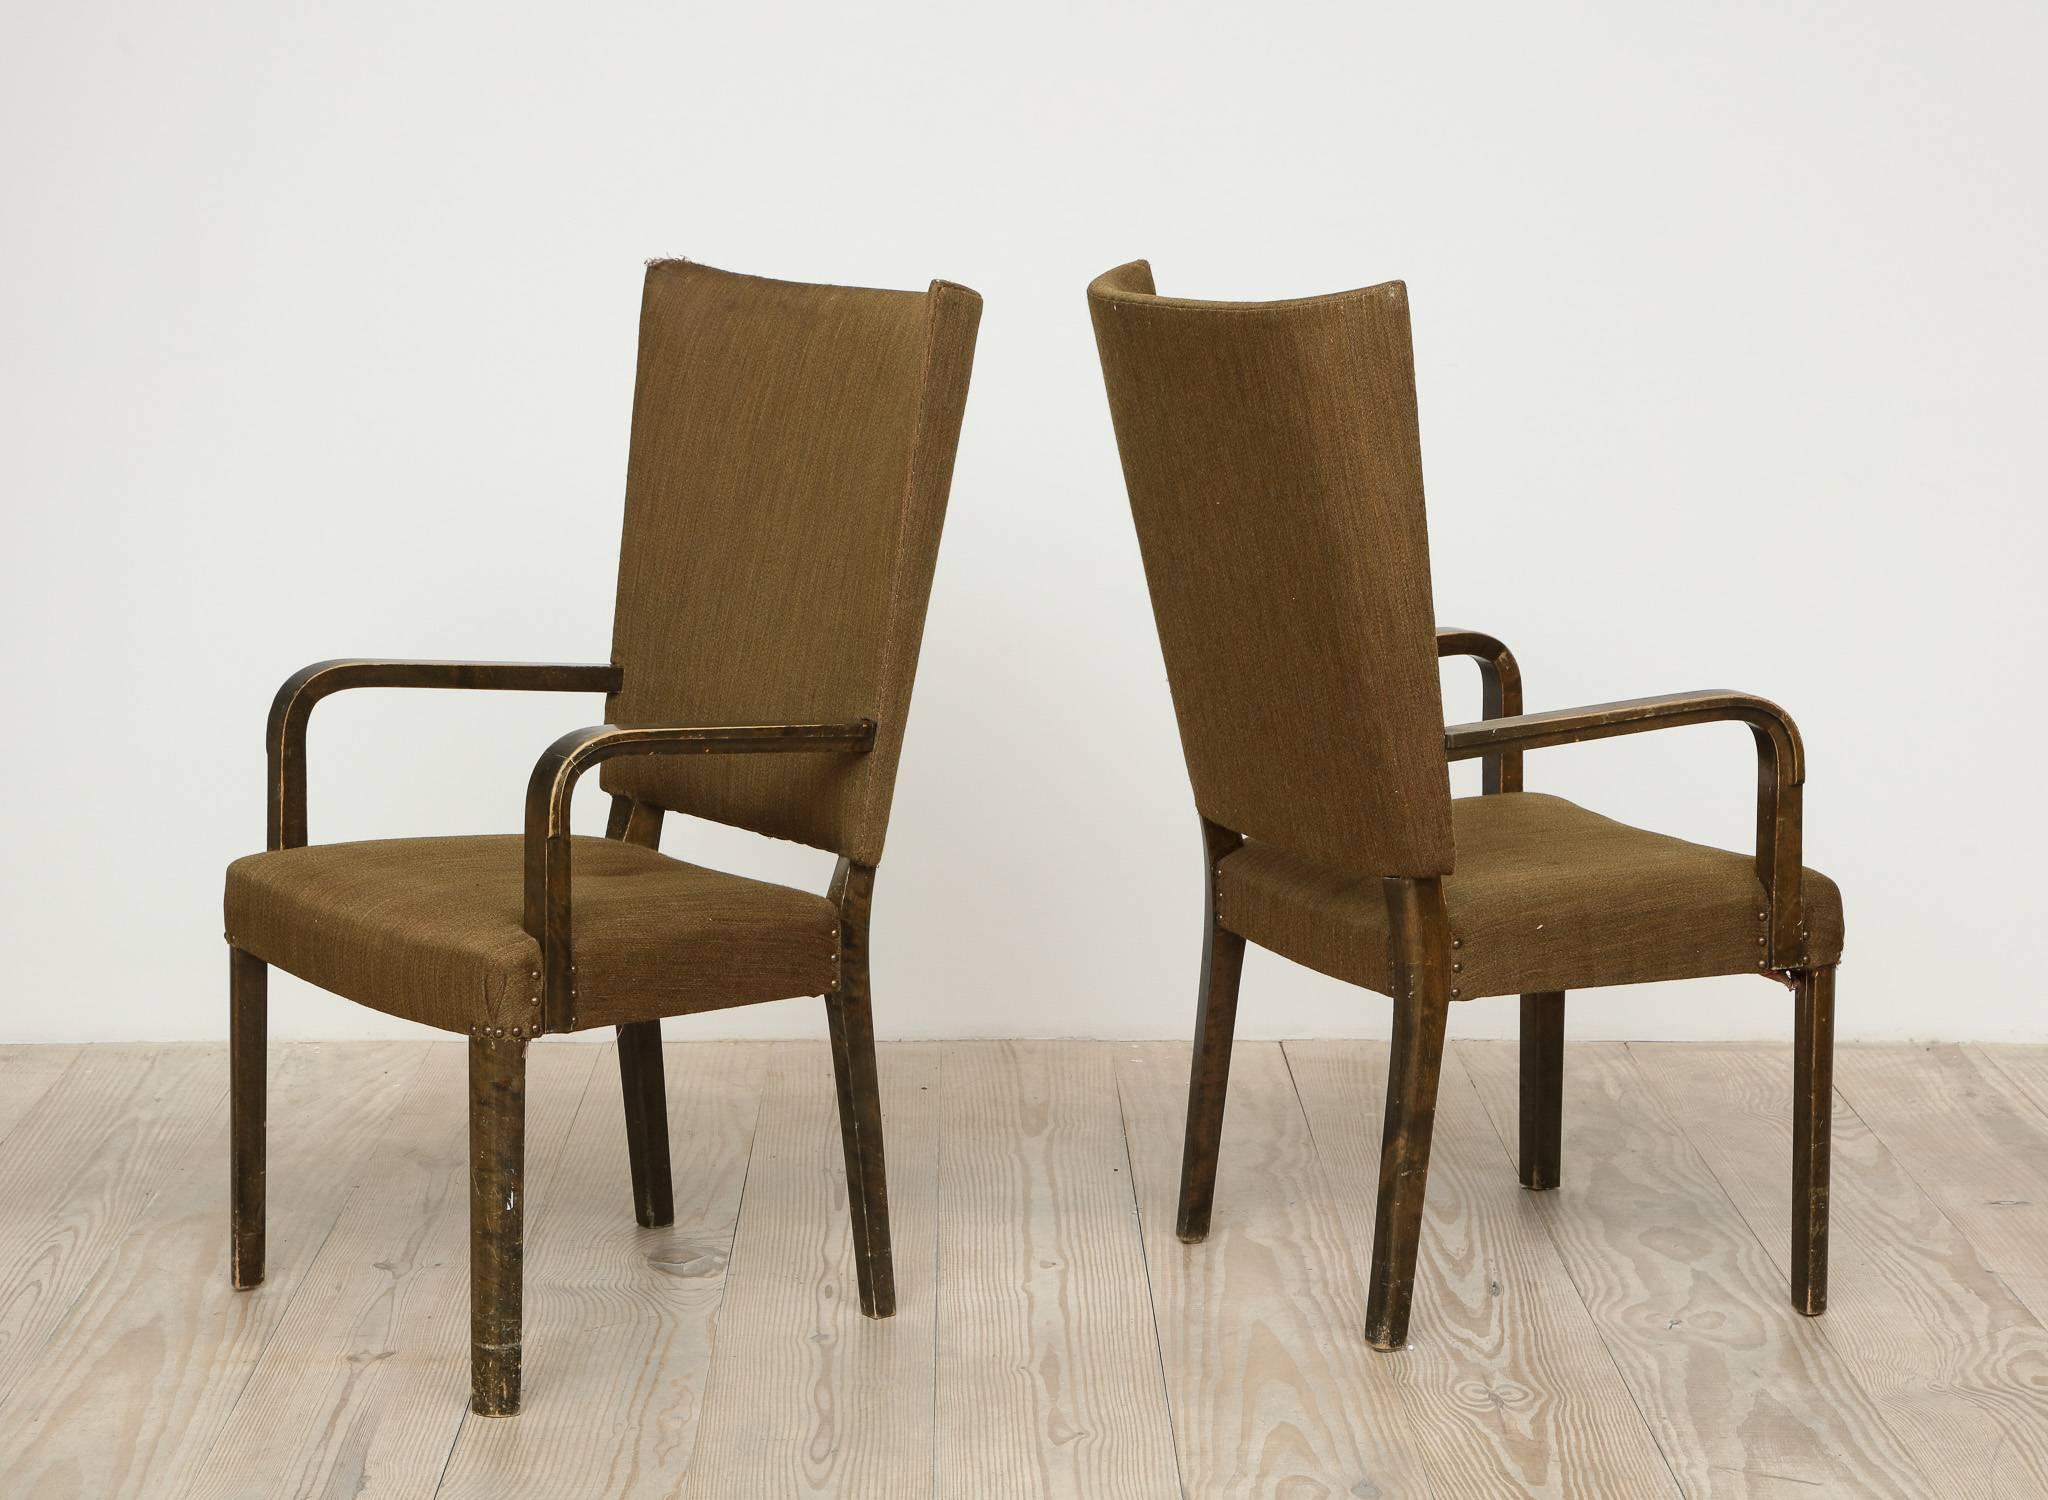 Swedish tall back birch armchairs, pair by Nordiska Kompaniet (NK), origin: Sweden, circa 1930, original fabric, extremely comfortable

Nordiska Kompaniet (NK) has been the premier department store in Scandinavia for over 100 years. Founded in